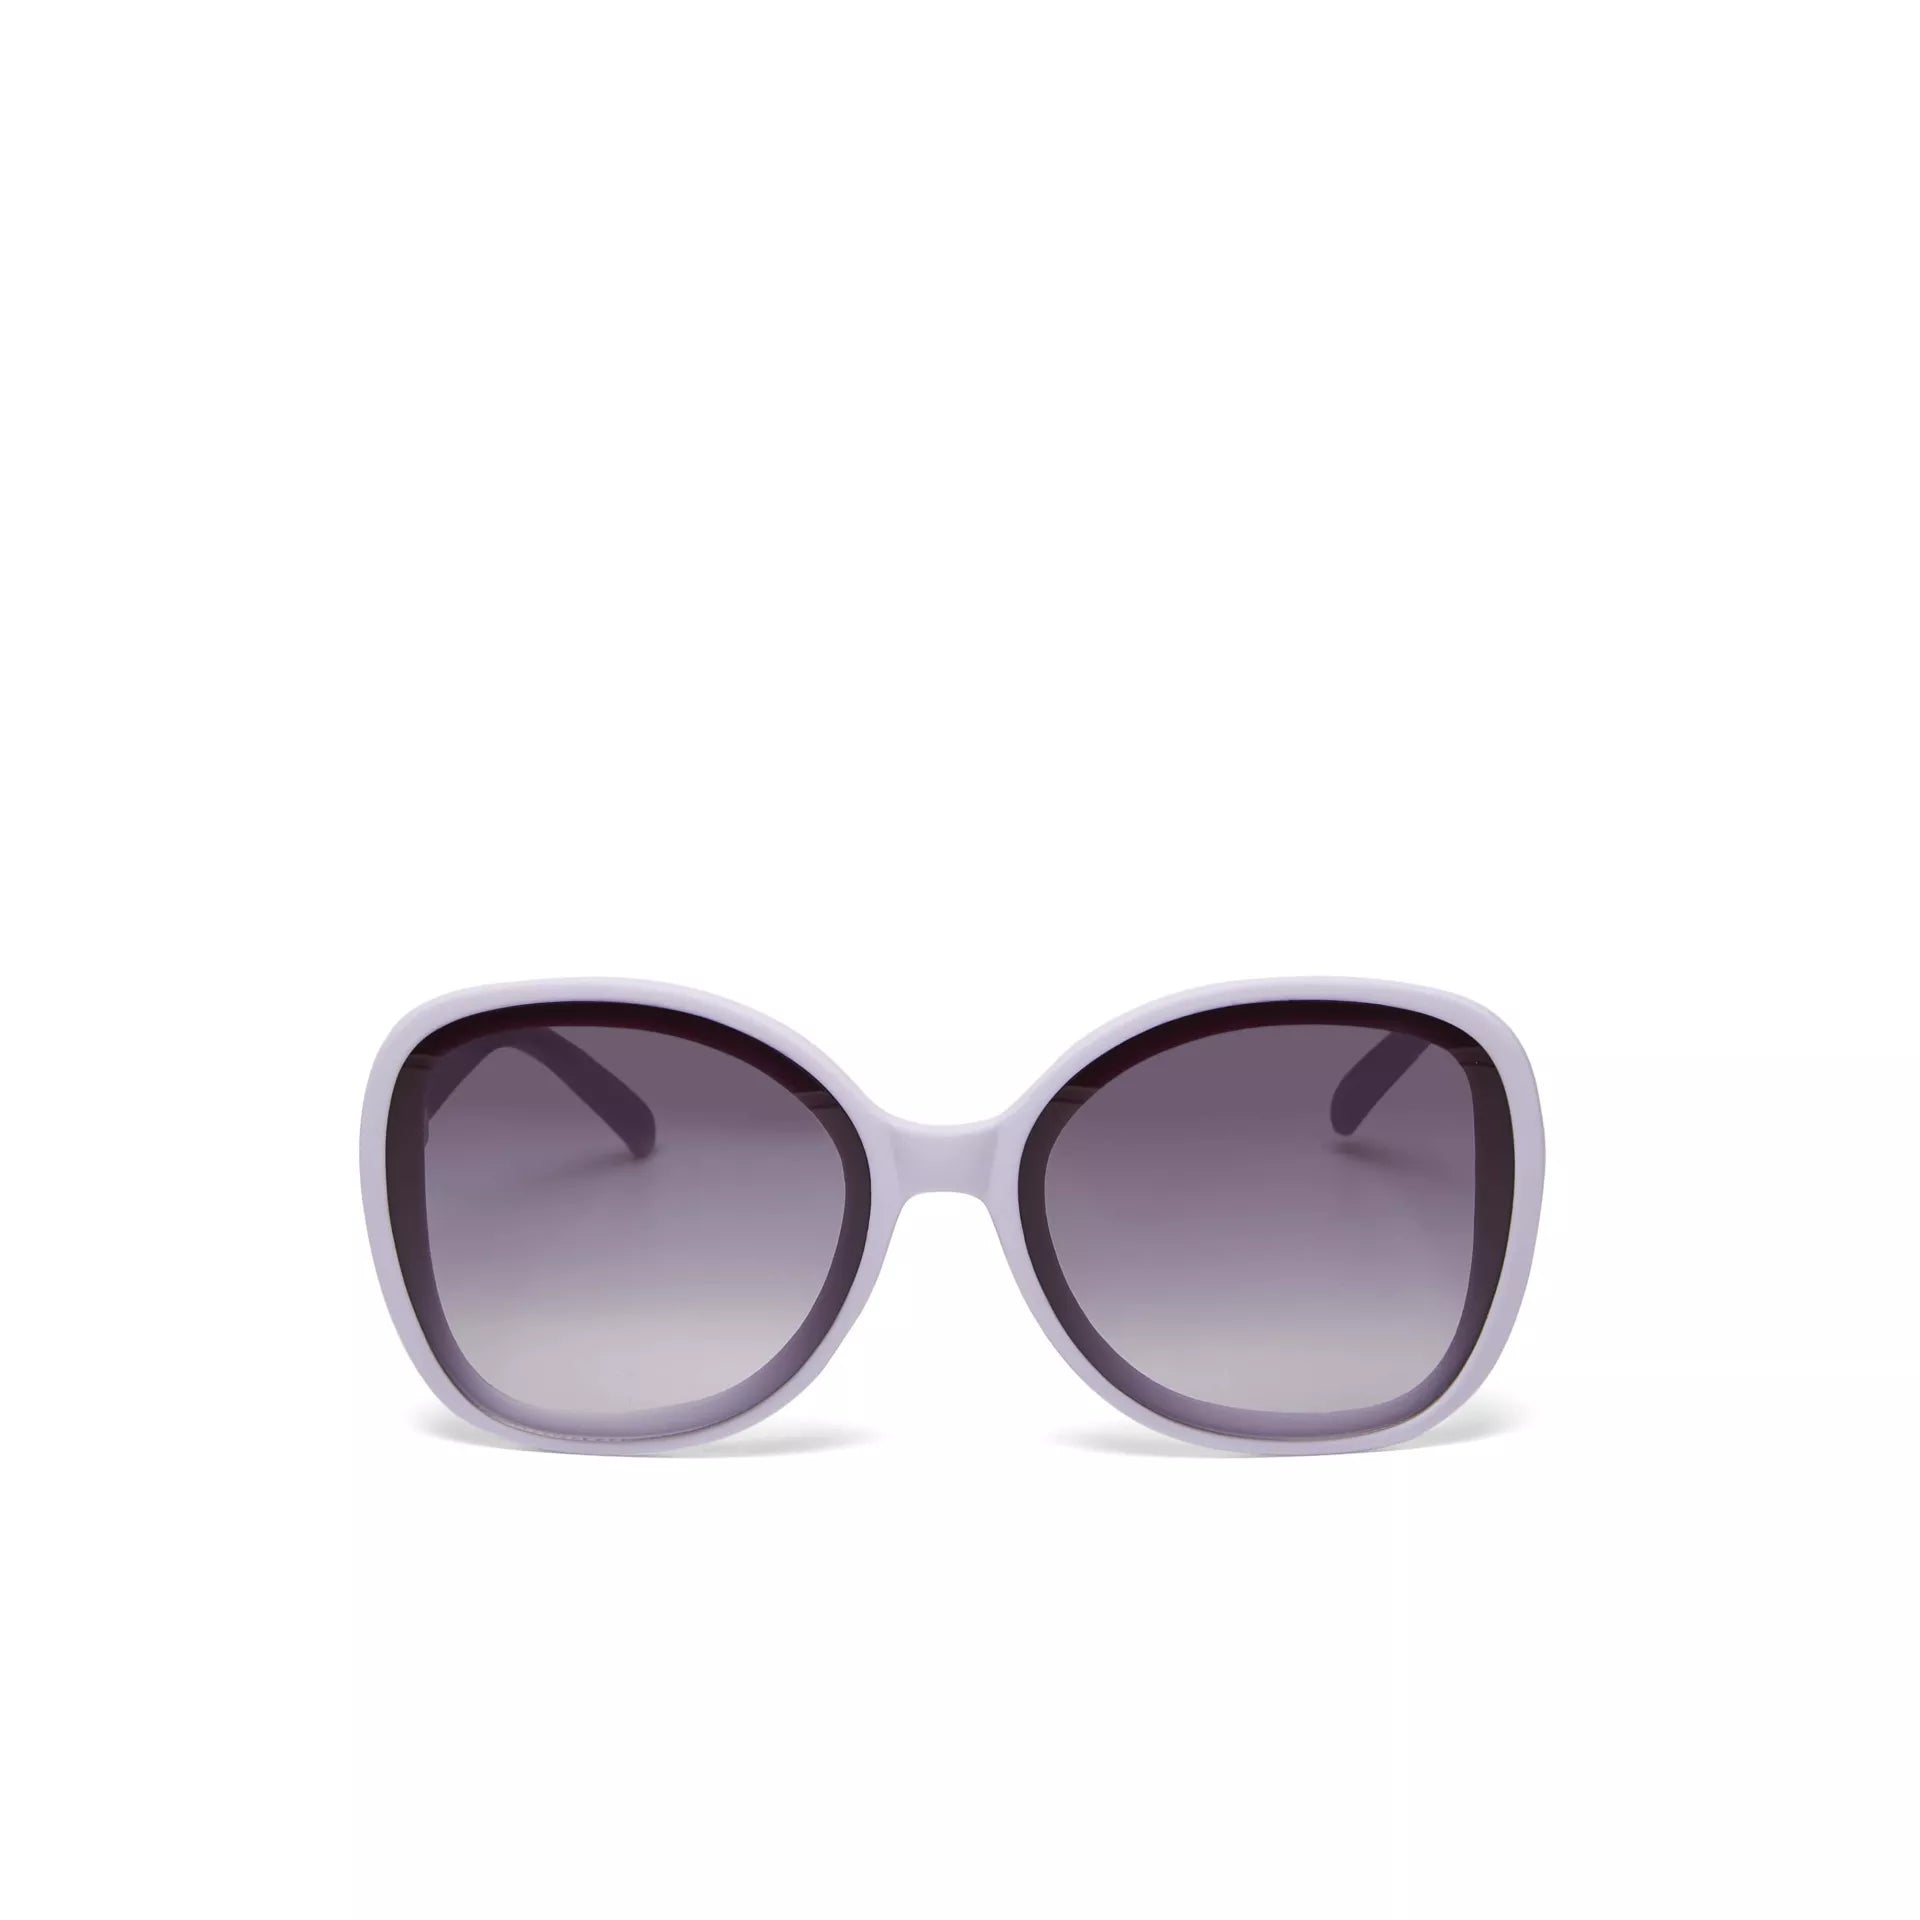 Fabulous Gifts Okkia Sunglasses Butterfly Lilac Breeze by Weirs of Baggot Street